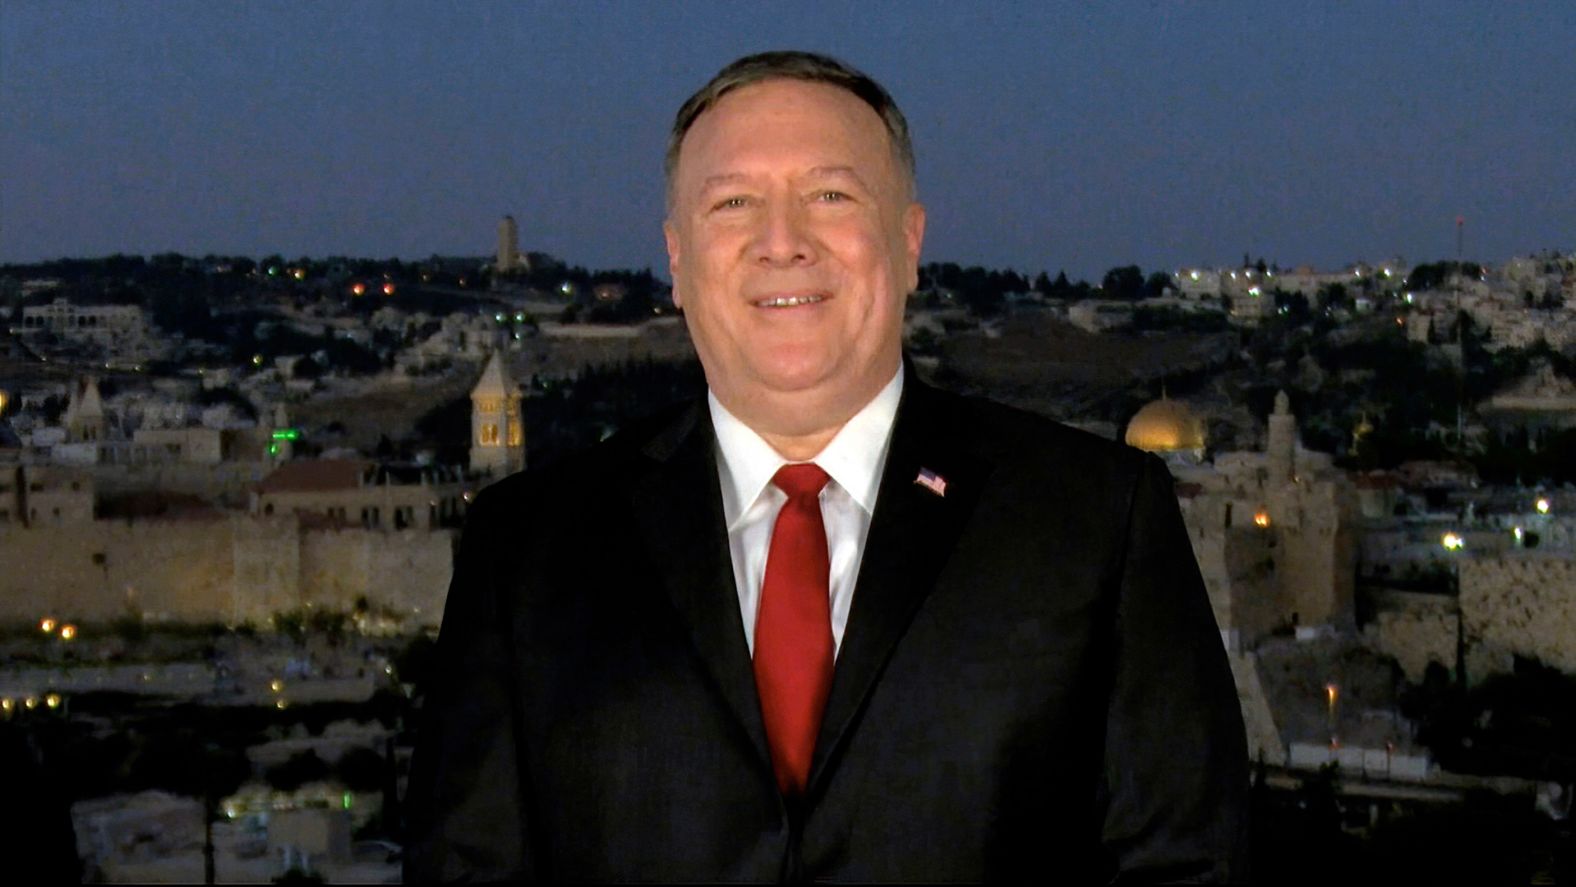 Secretary of State Mike Pompeo, <a href="https://www.cnn.com/politics/live-news/rnc-2020-day-2/h_c83d2fb668e08d9862ae814fc9418d66" target="_blank">speaking from a hotel rooftop in Jerusalem,</a> sought to cast Trump as the ultimate dealmaker. Pompeo's location highlighted a recent agreement between Israel and the United Arab Emirates to normalize relations that Trump helped broker. Pompeo's remarks <a href="https://www.cnn.com/2020/08/25/politics/castro-investigation-pompeo-rnc-speech/index.html" target="_blank">break with past precedent</a> of secretaries of state not addressing political conventions. There is also a long-standing protocol of not discussing domestic politics while abroad.